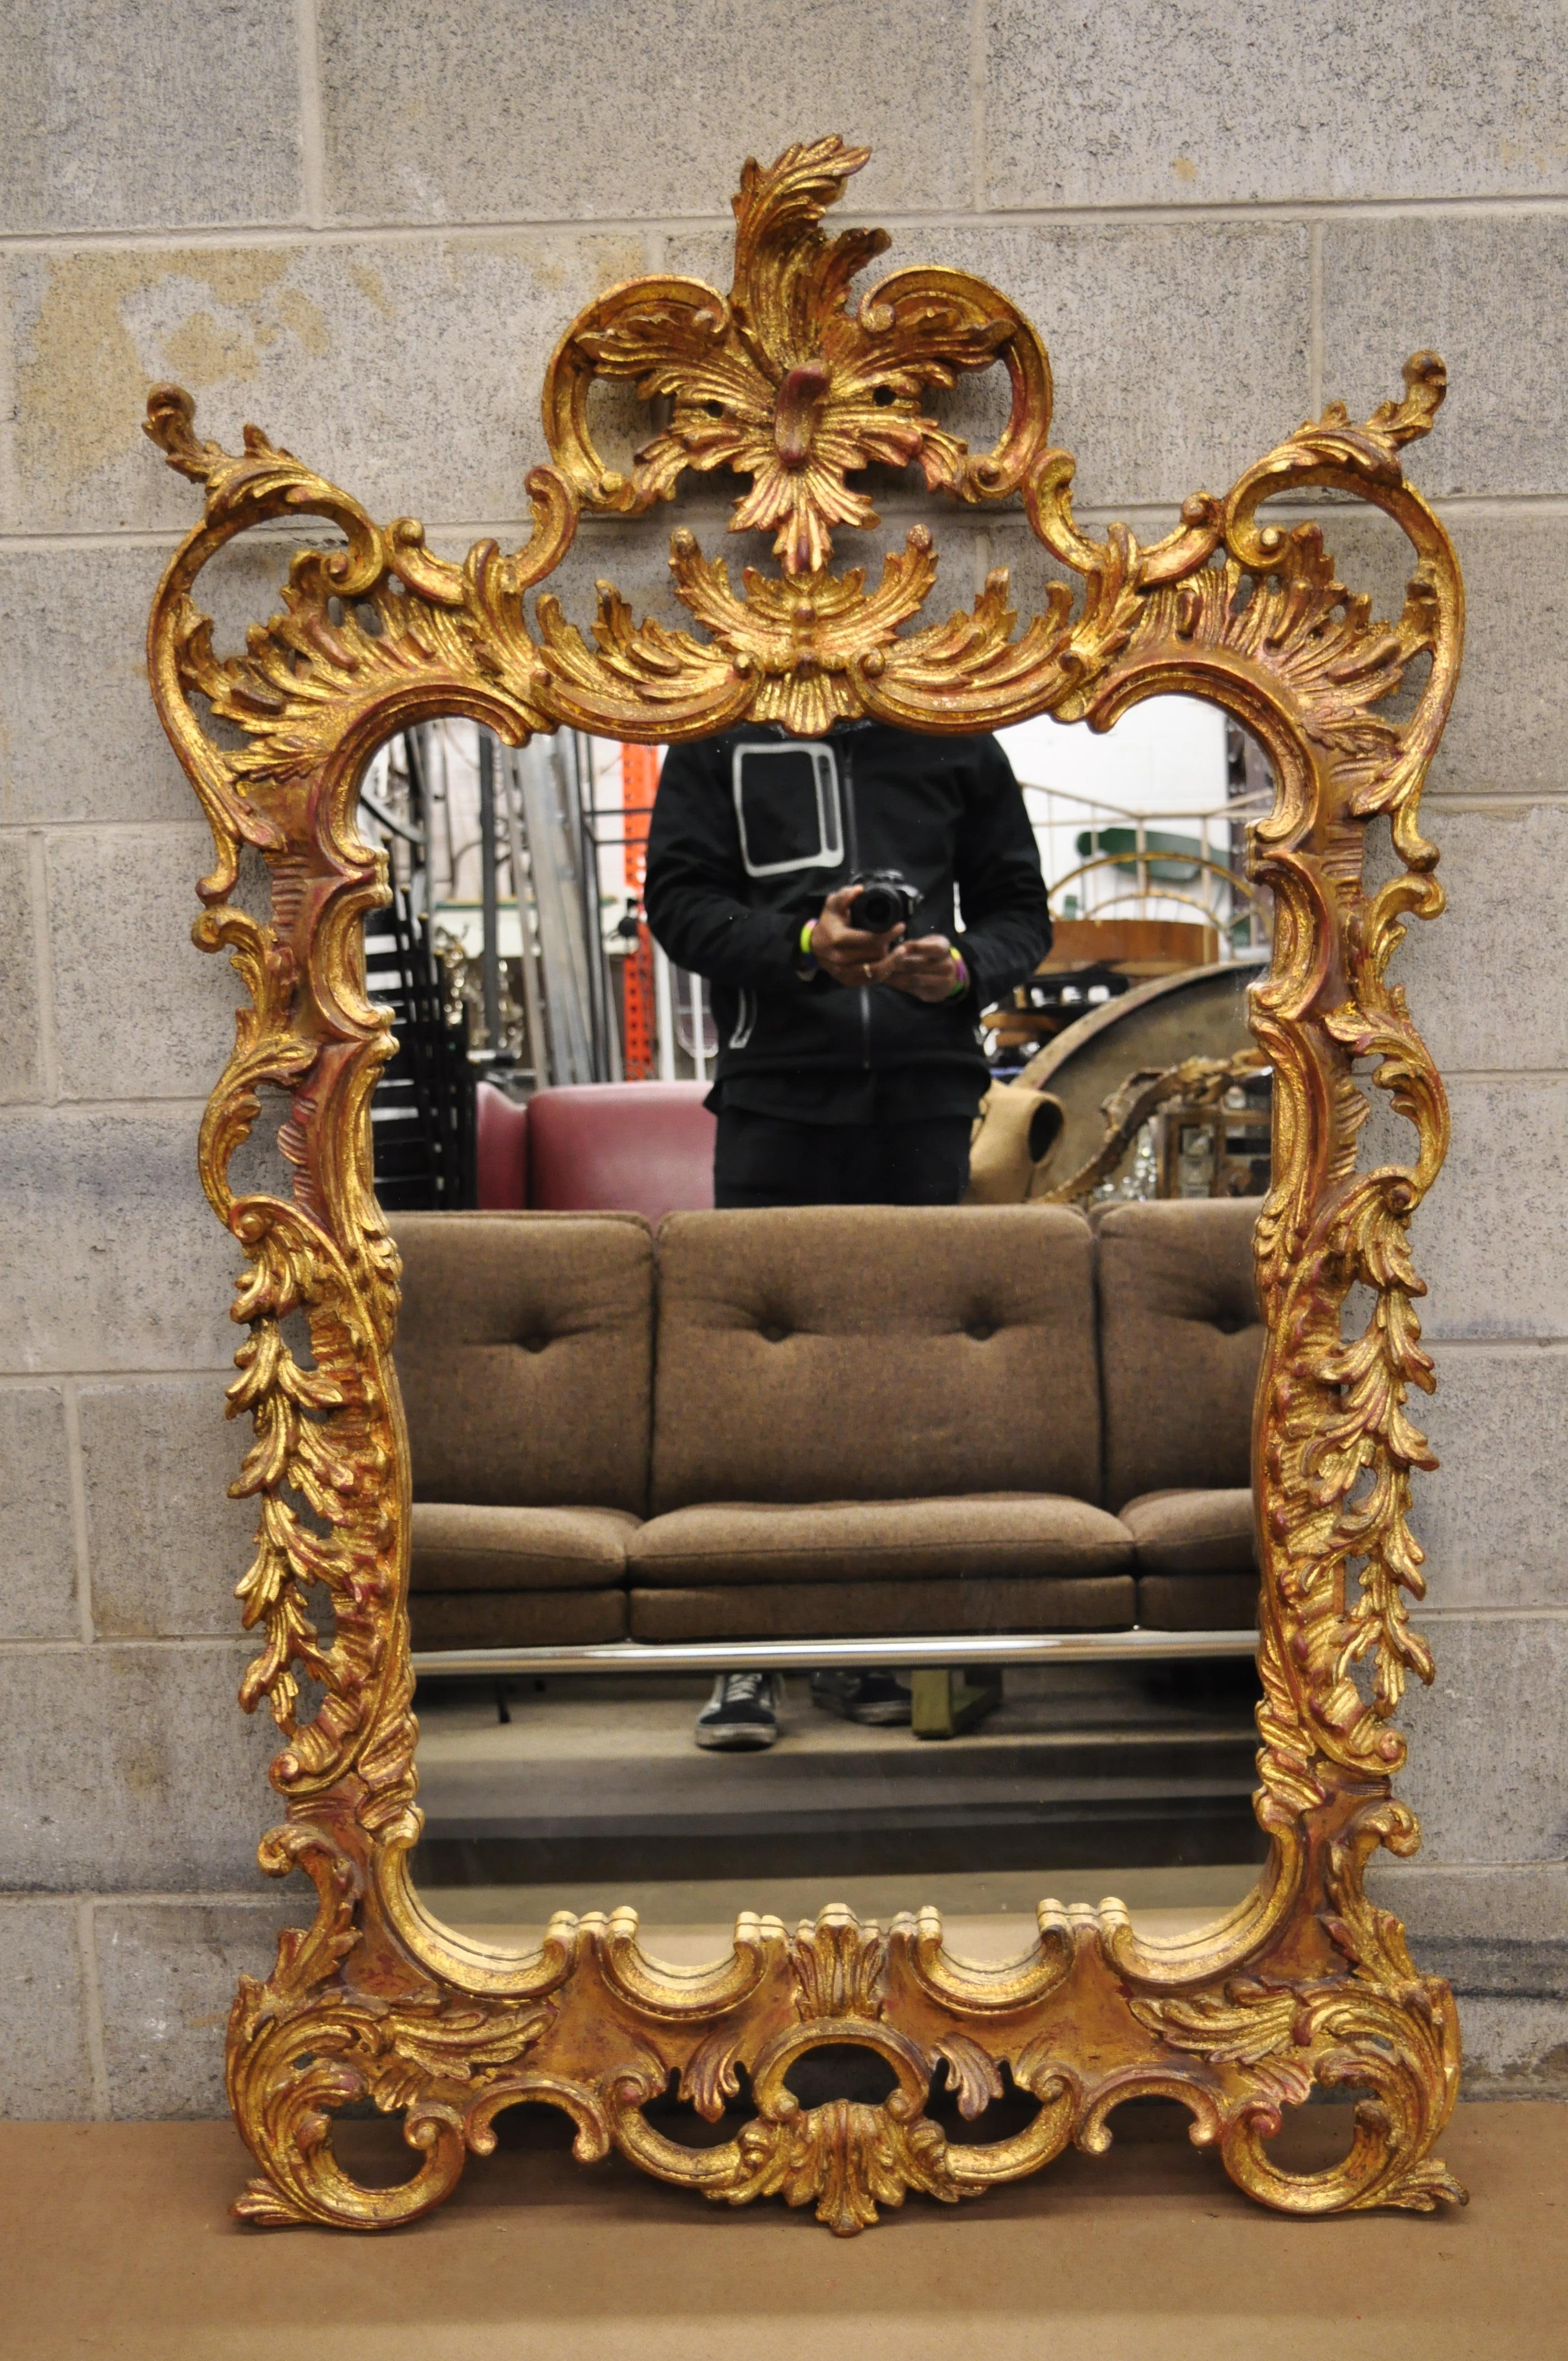 Vintage gold leaf French Louis XV Rococo style console wall mirror. Item features ornate pierce cared frame, gold leaf finish, great style and form, circa late 20th century. Measures: 57